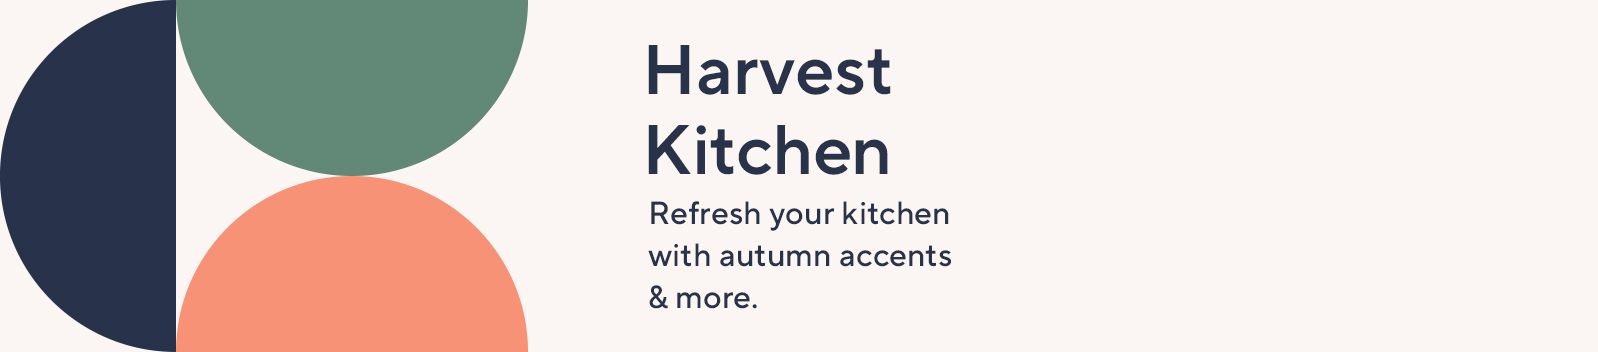 Harvest Kitchen Refresh your kitchen with autumn accents & more.